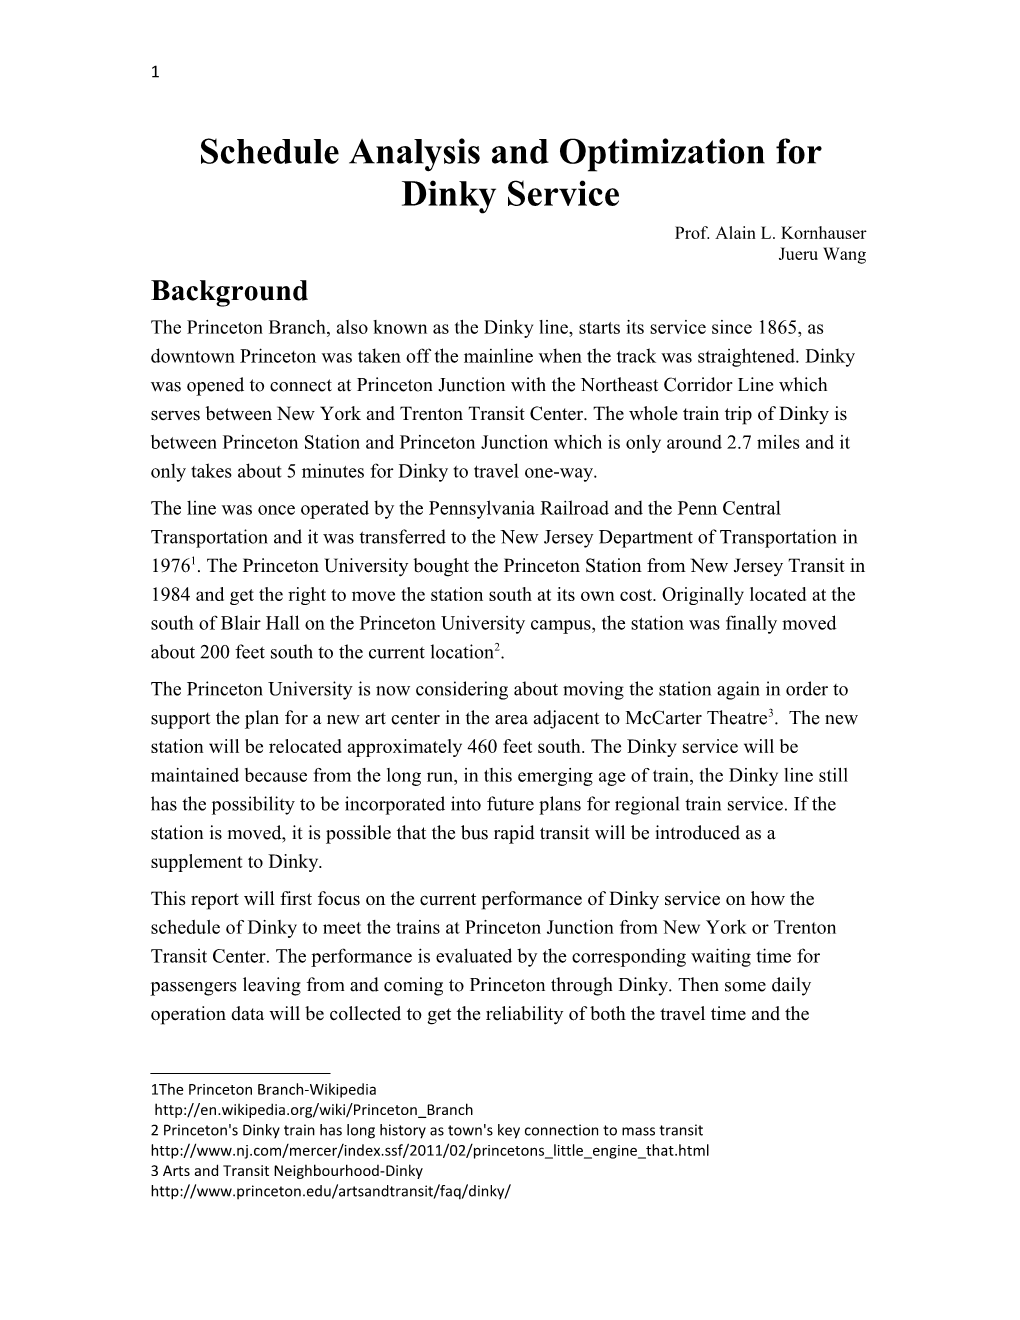 Schedule Analysis and Optimization for Dinky Service